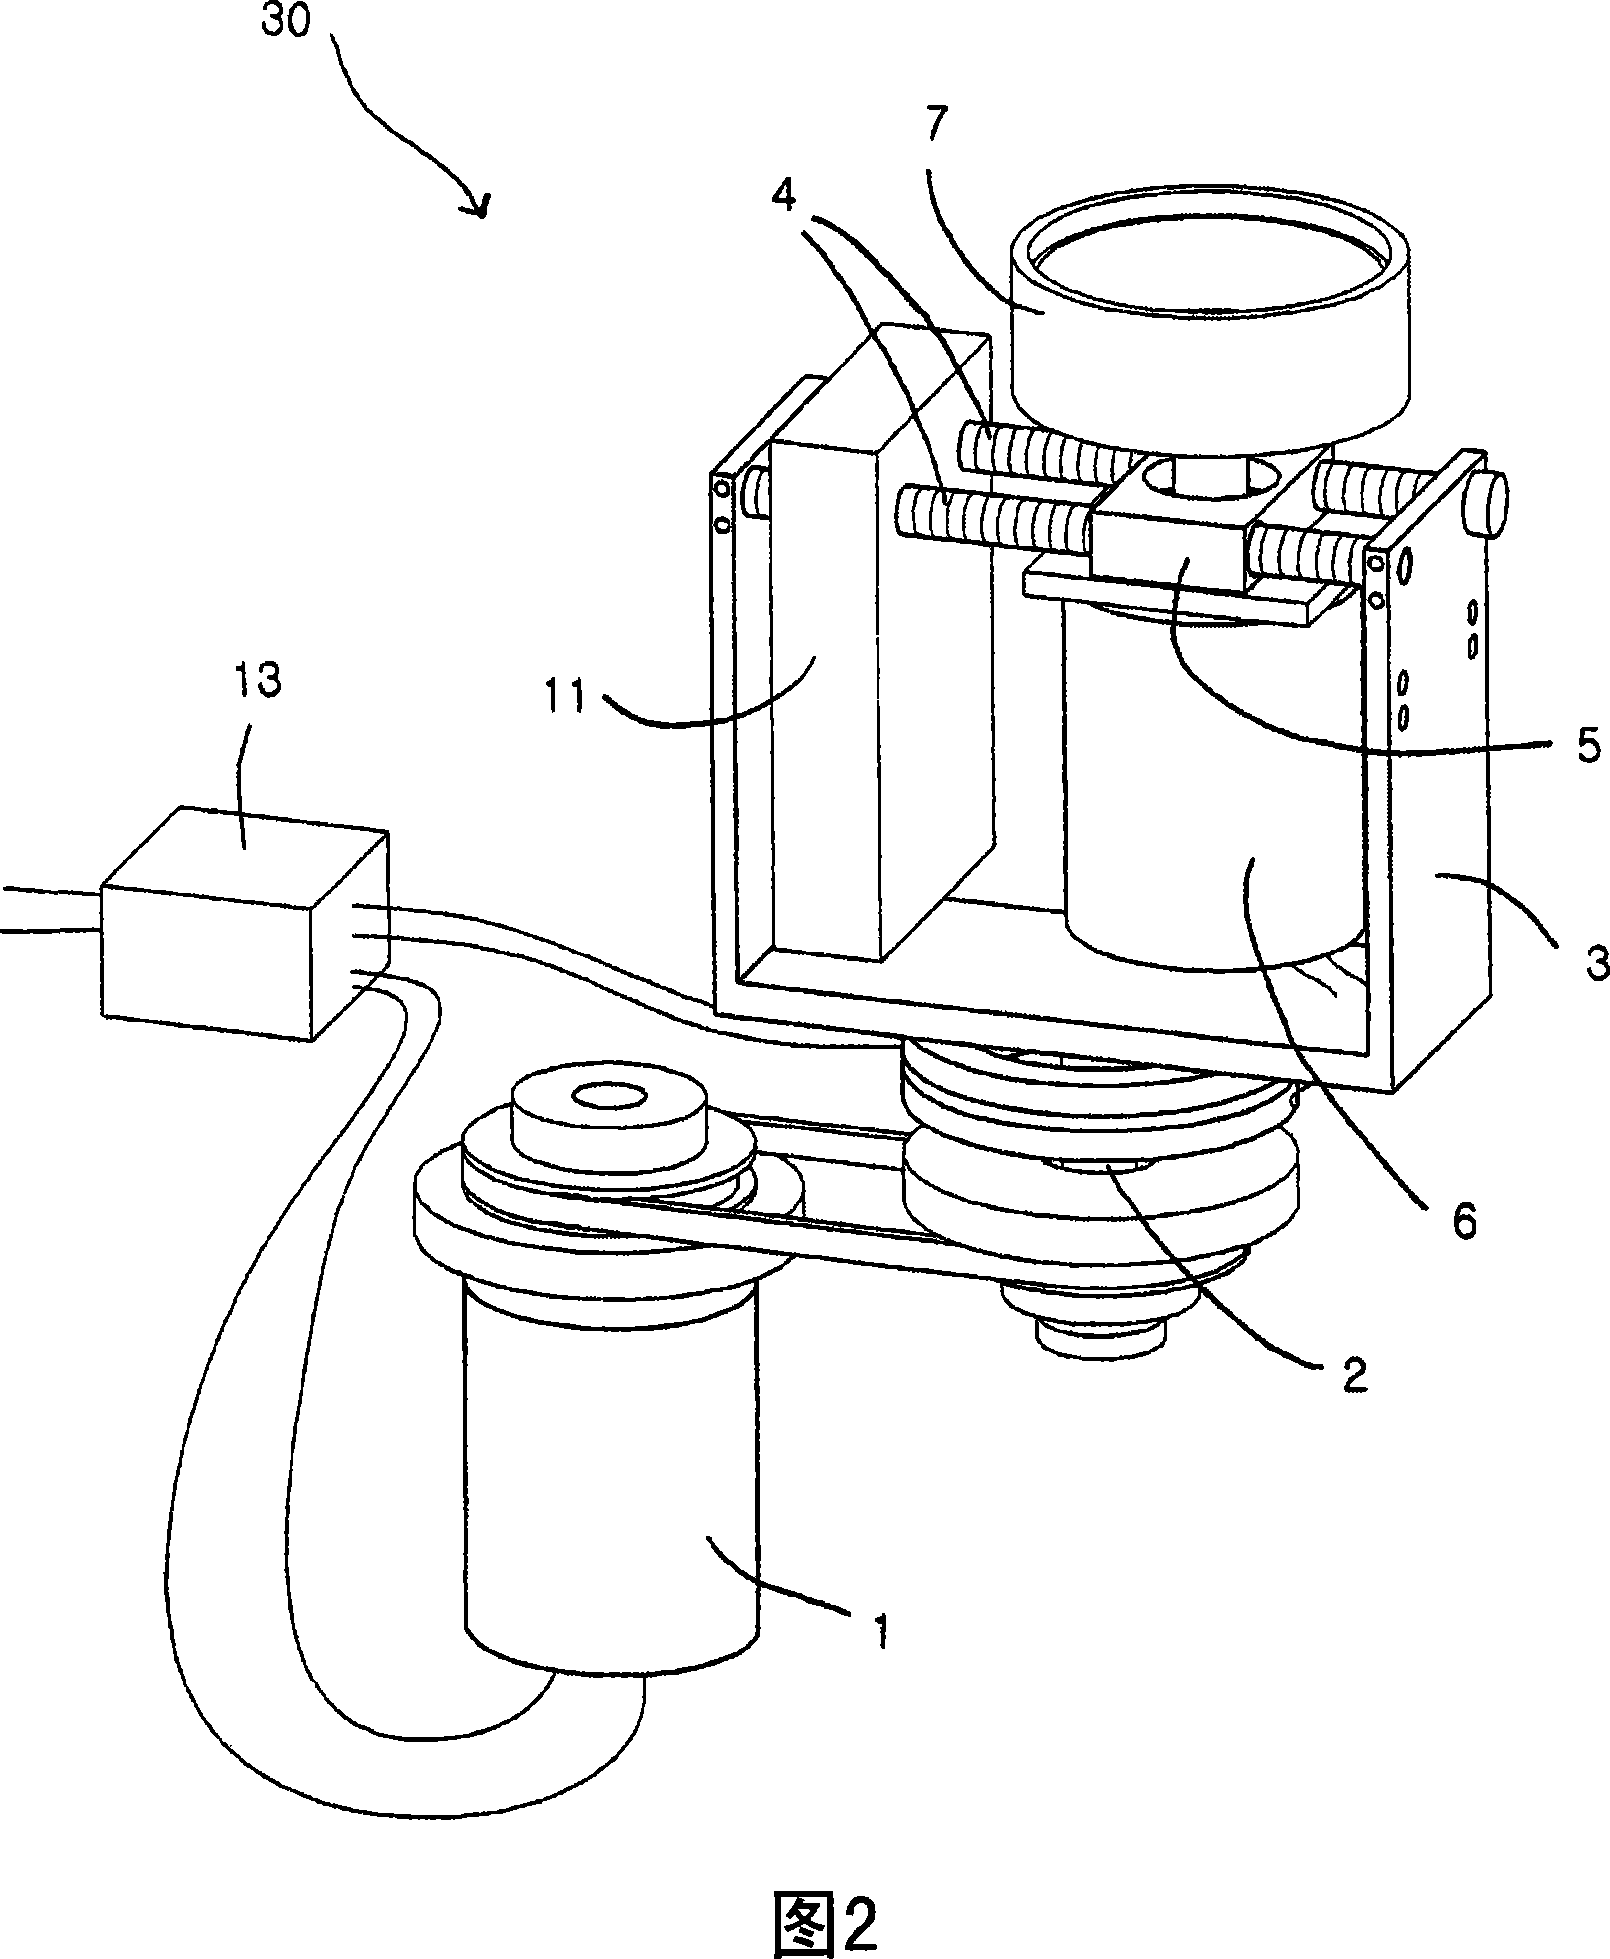 Apparatus and method for making product having various shapes